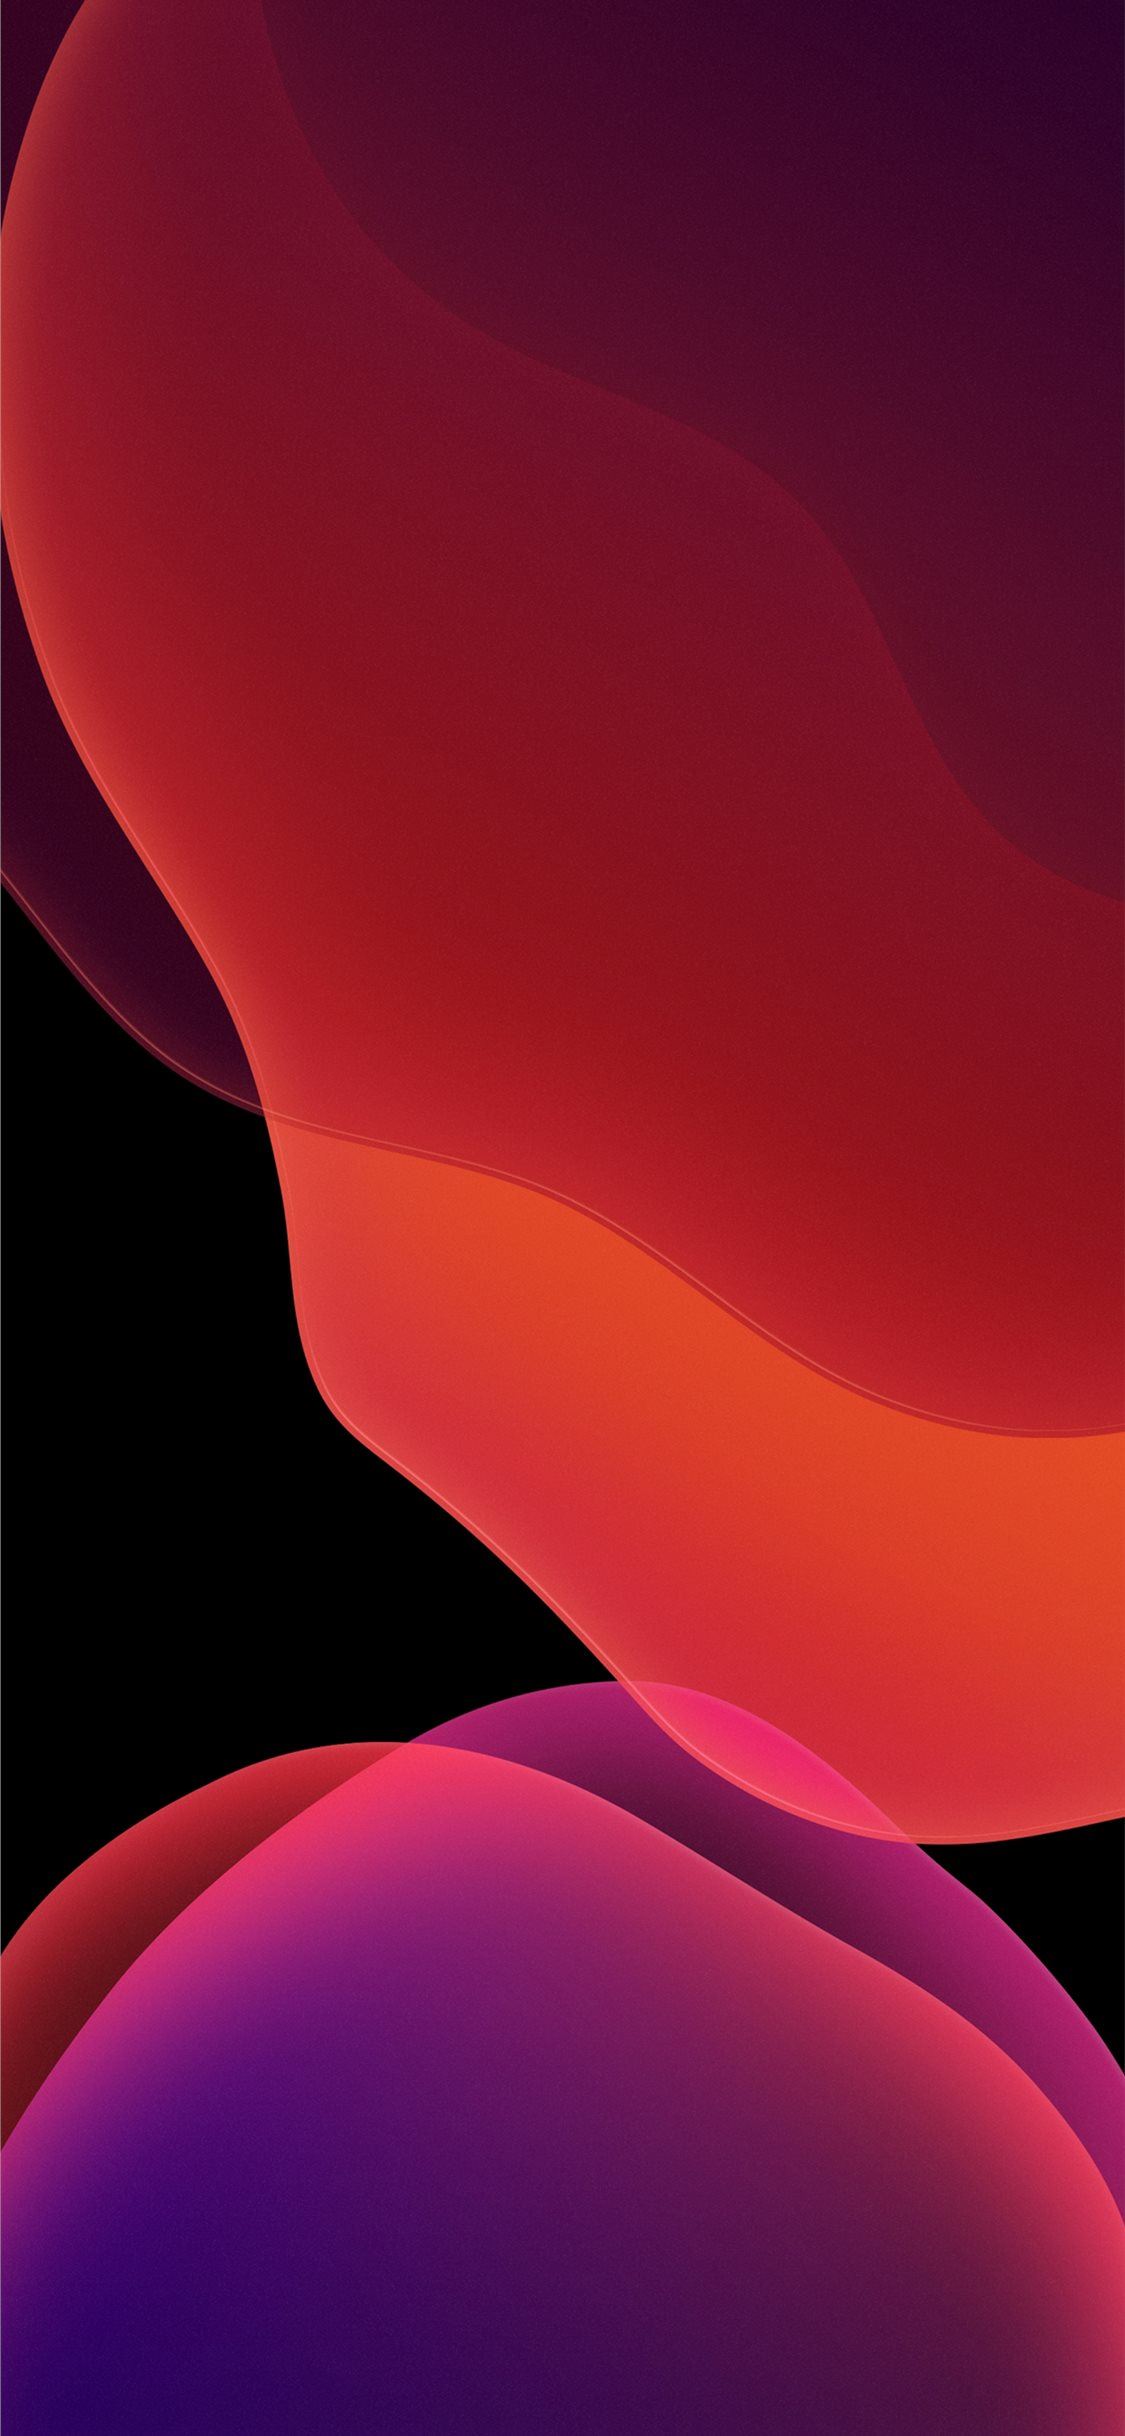 iPhone SE 2020 Wallpapers Are Definitely Not iPhone 8 Wallpapers,  Absolutely Not, Get Out of Here With That Wild, Unfounded Speculation, You  Ridiculous Weirdo | iFixit News